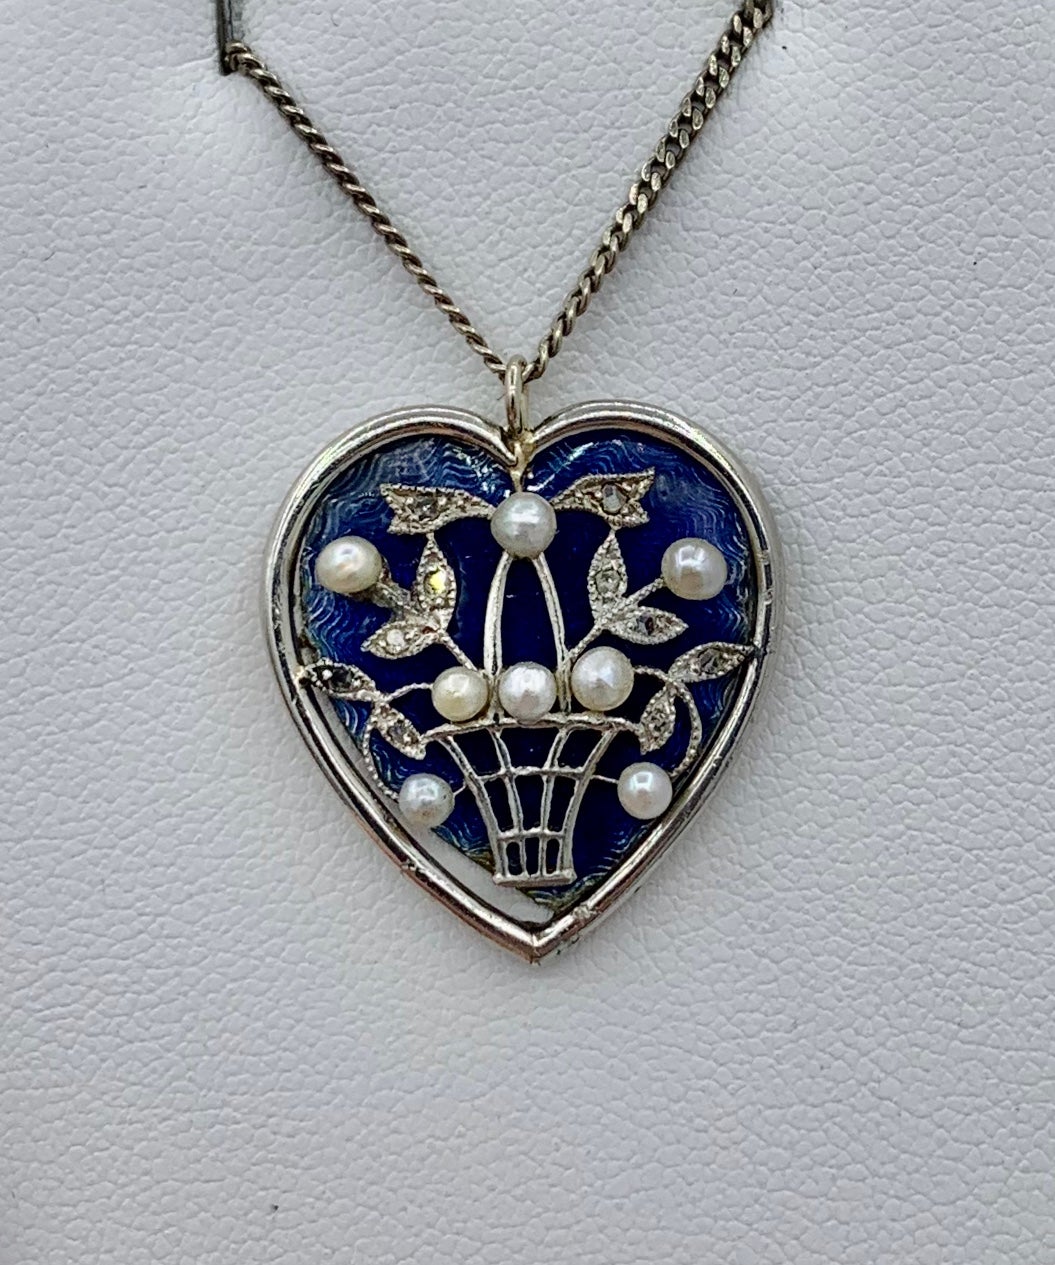 THIS IS AN EXTRAORDINARY MUSEUM QUALITY ANTIQUE VICTORIAN - EDWARDIAN PENDANT NECKLACE.  THE PENDANT IS IN THE FORM OF A HEART WITH A FLOWER BASKET IN 14K WHITE GOLD WITH ROSE CUT DIAMONDS AND PEARLS IN AN OPENWORK DESIGN ON A ROYAL BLUE ENAMEL